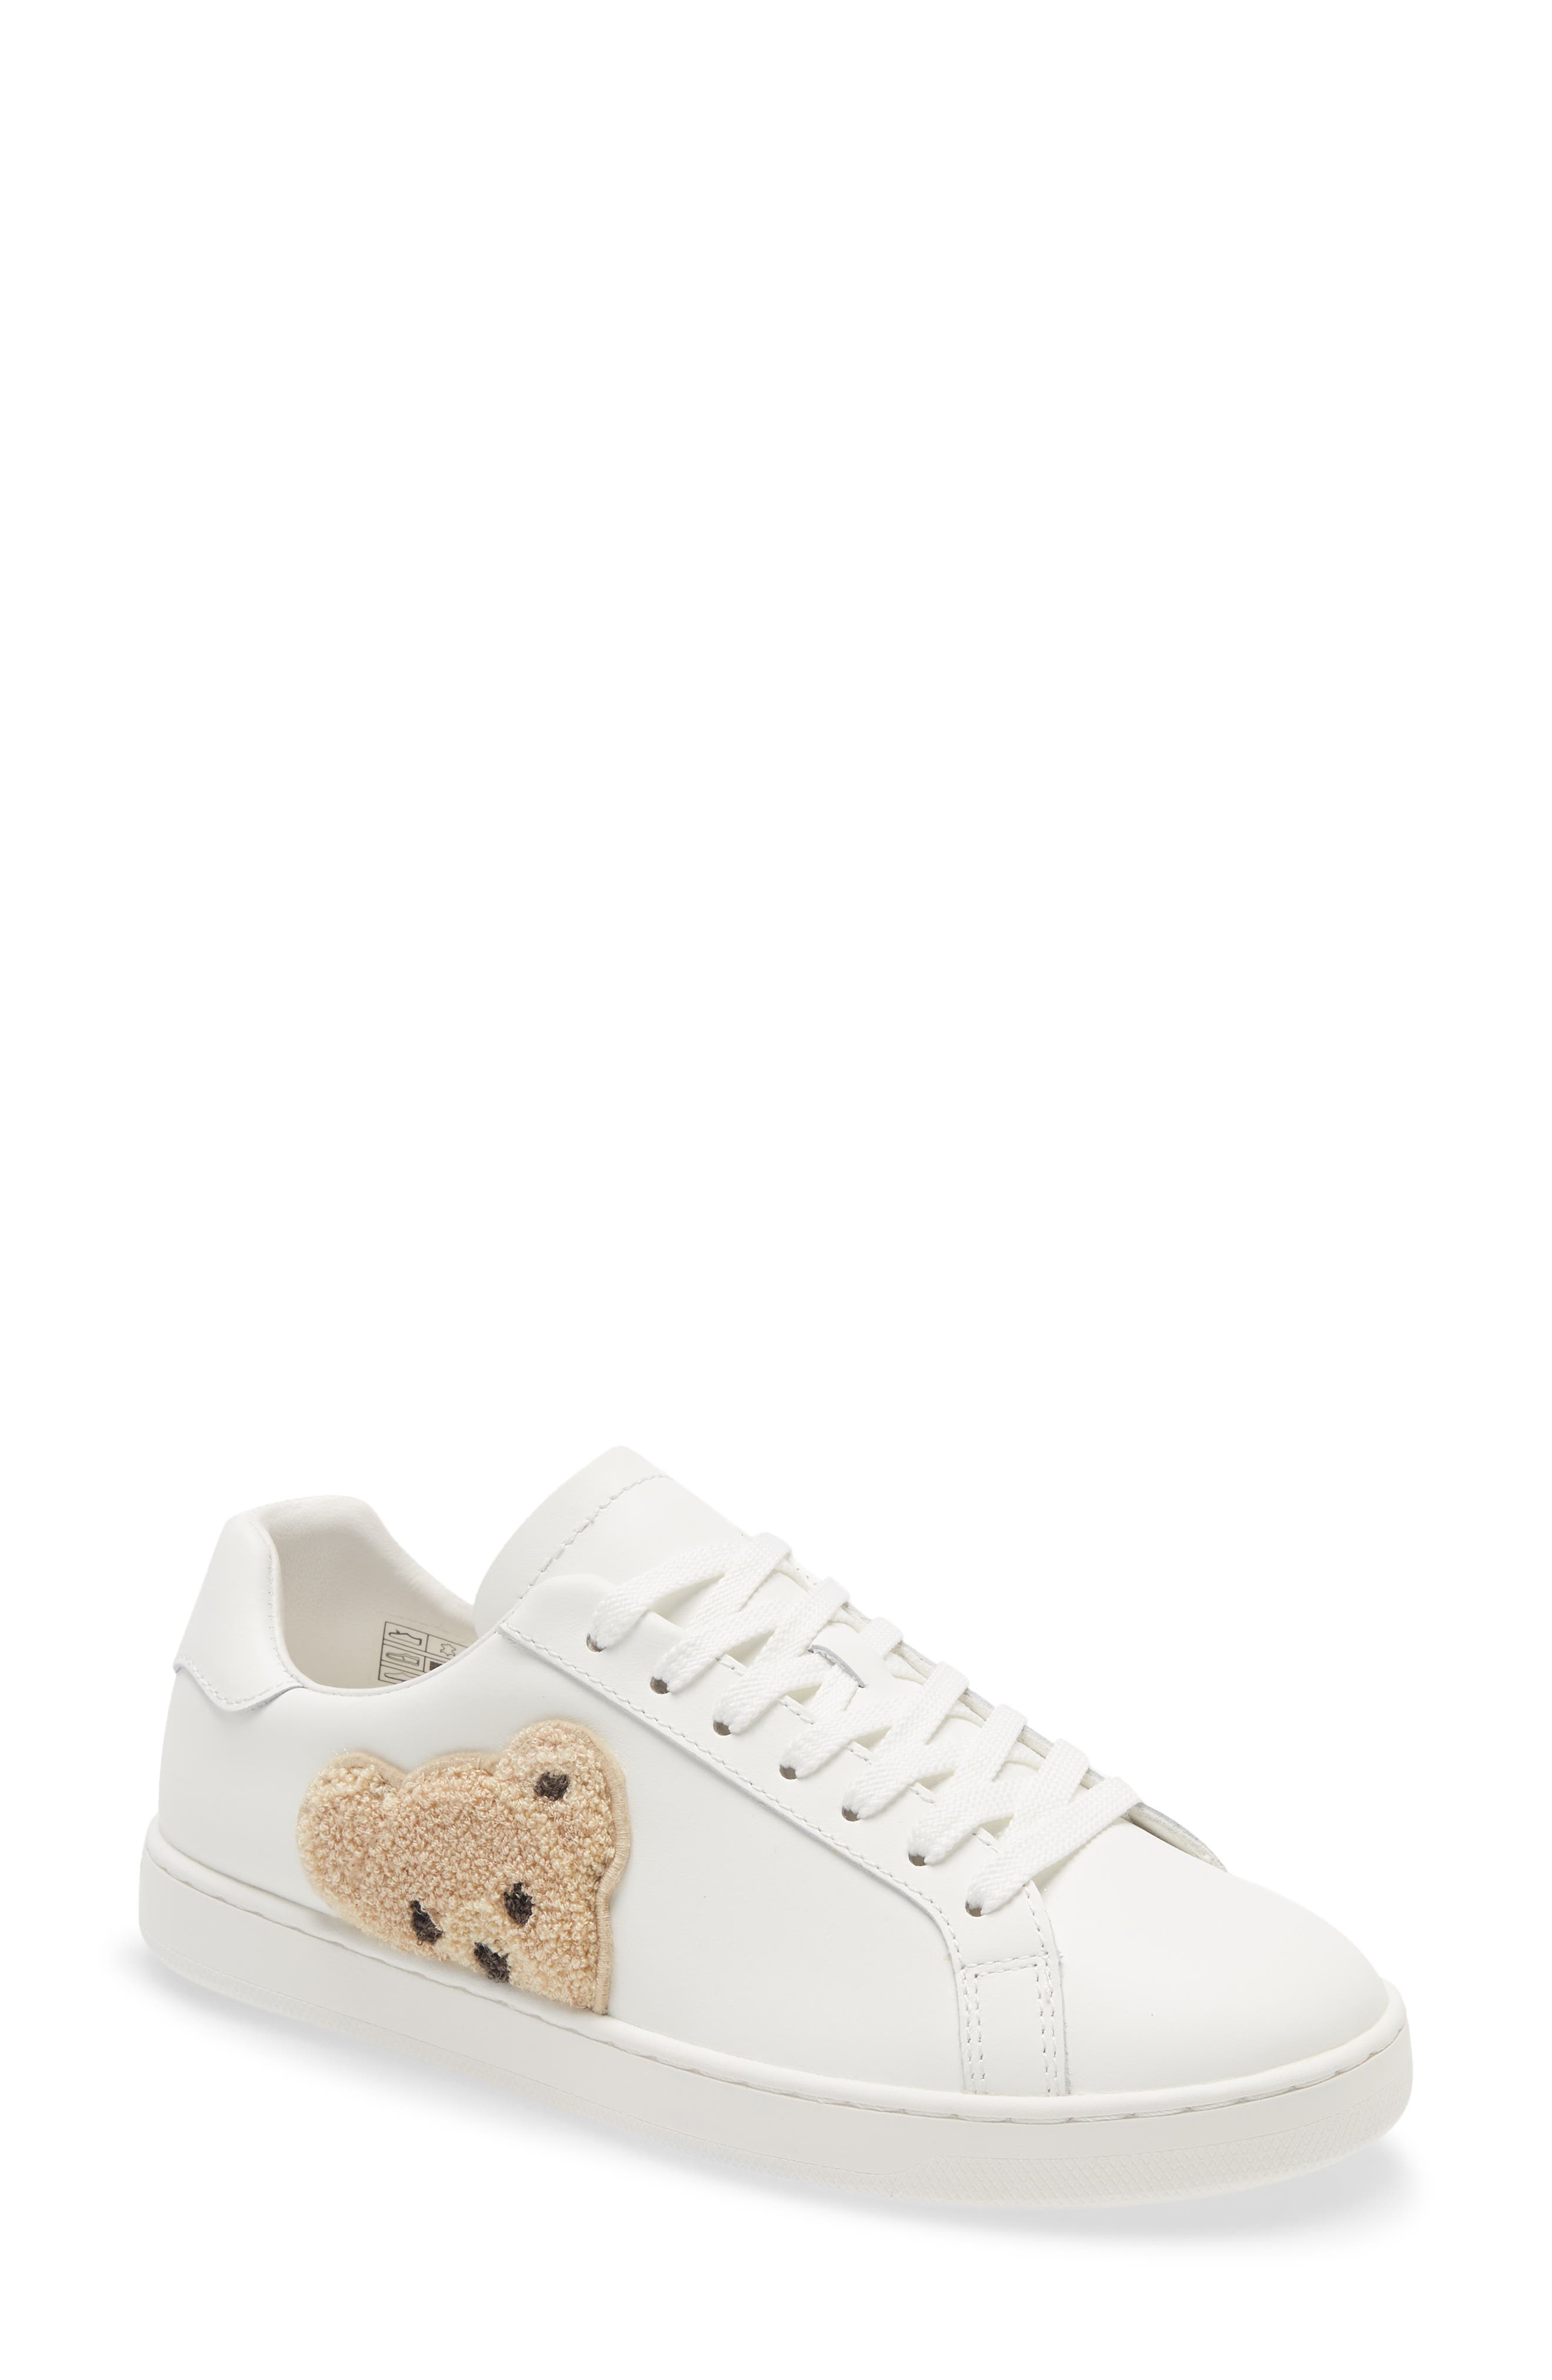 Palm Angels Teddy Bear Applique Sneaker in White/Brown at Nordstrom, Size 5Us